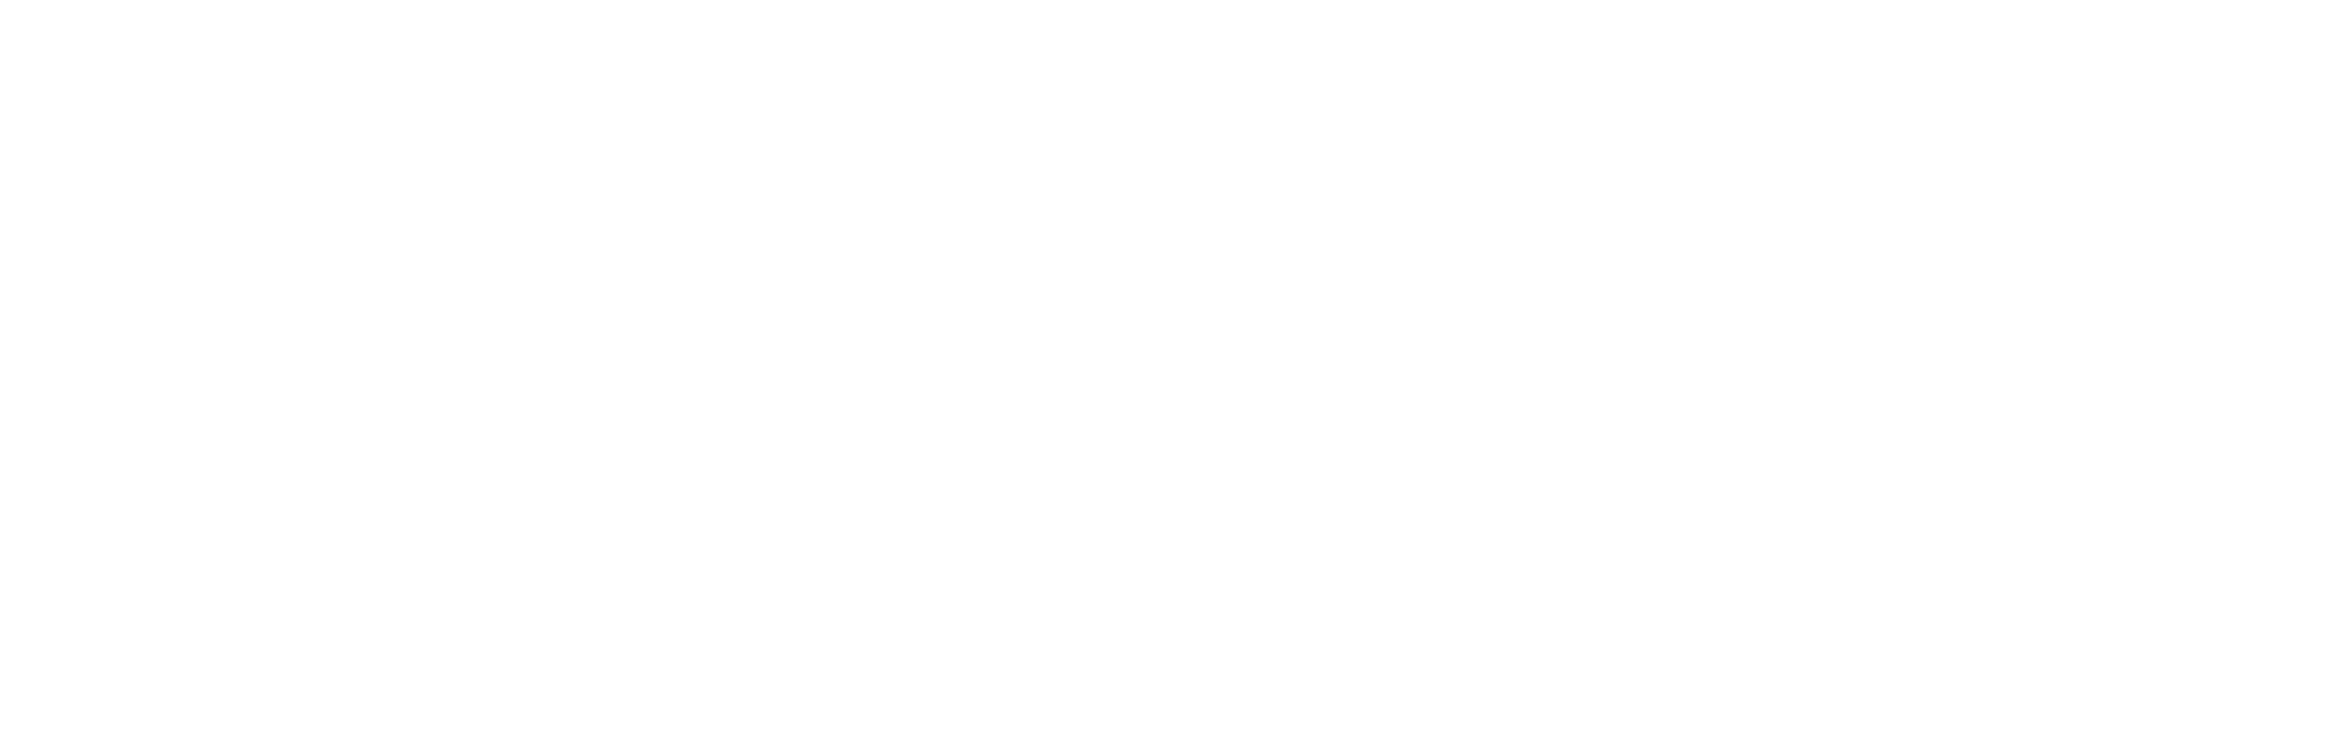 Williamsburg Logo - Dining in Colonial Williamsburg. Colonial Williamsburg Resorts